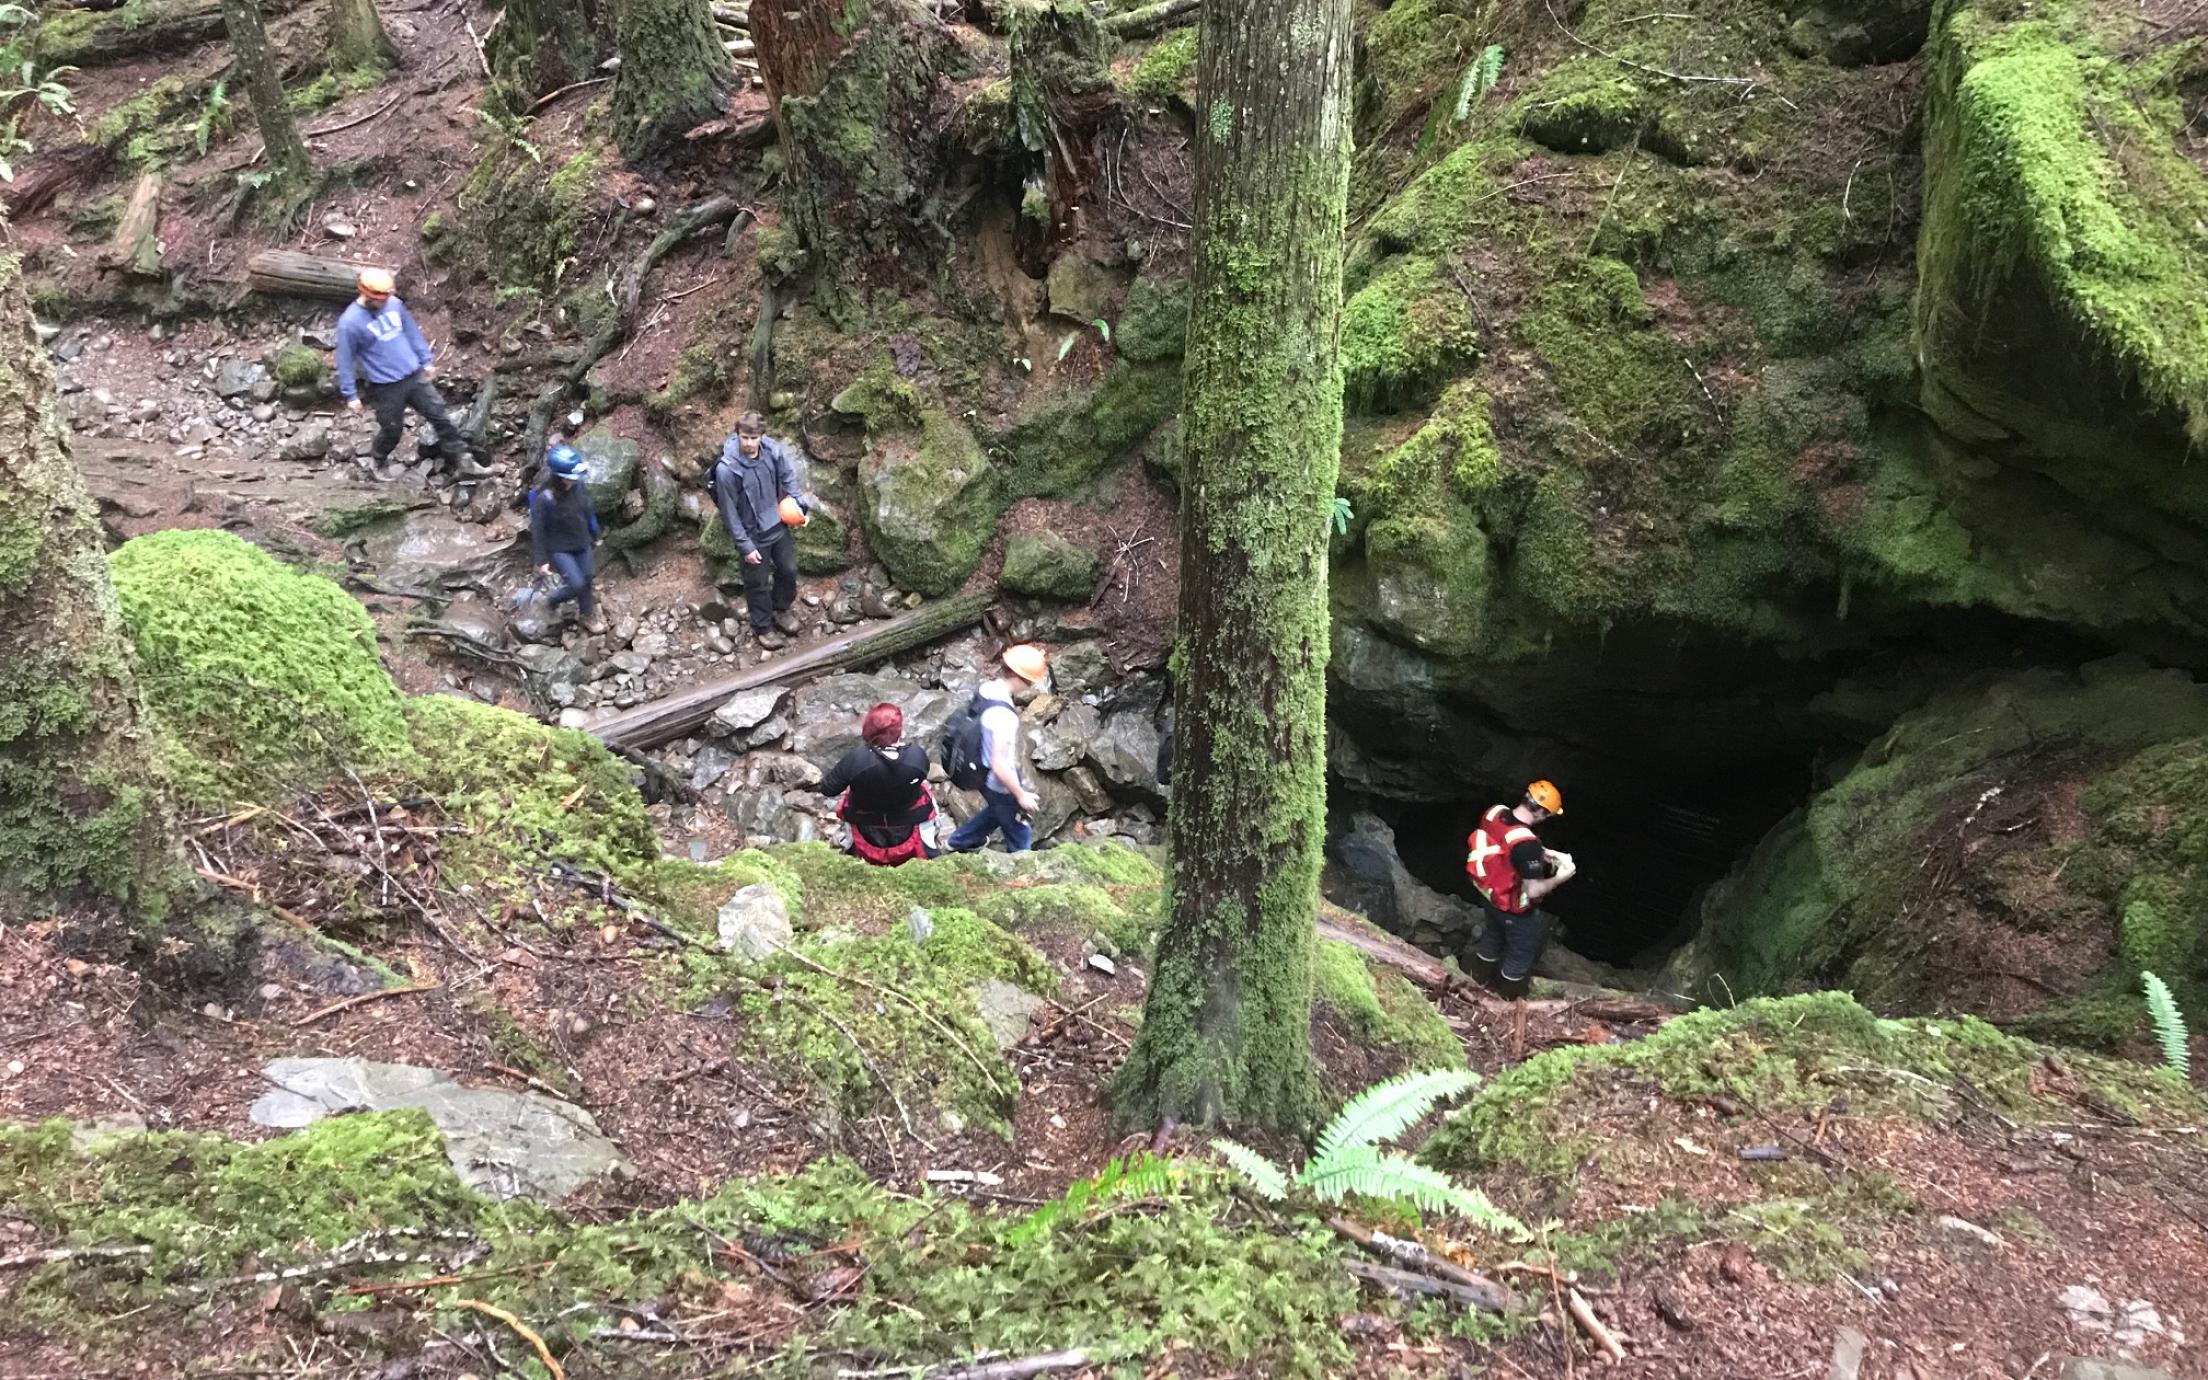 Students exploring the cave system at Horne Lake during a GEOL401 field trip